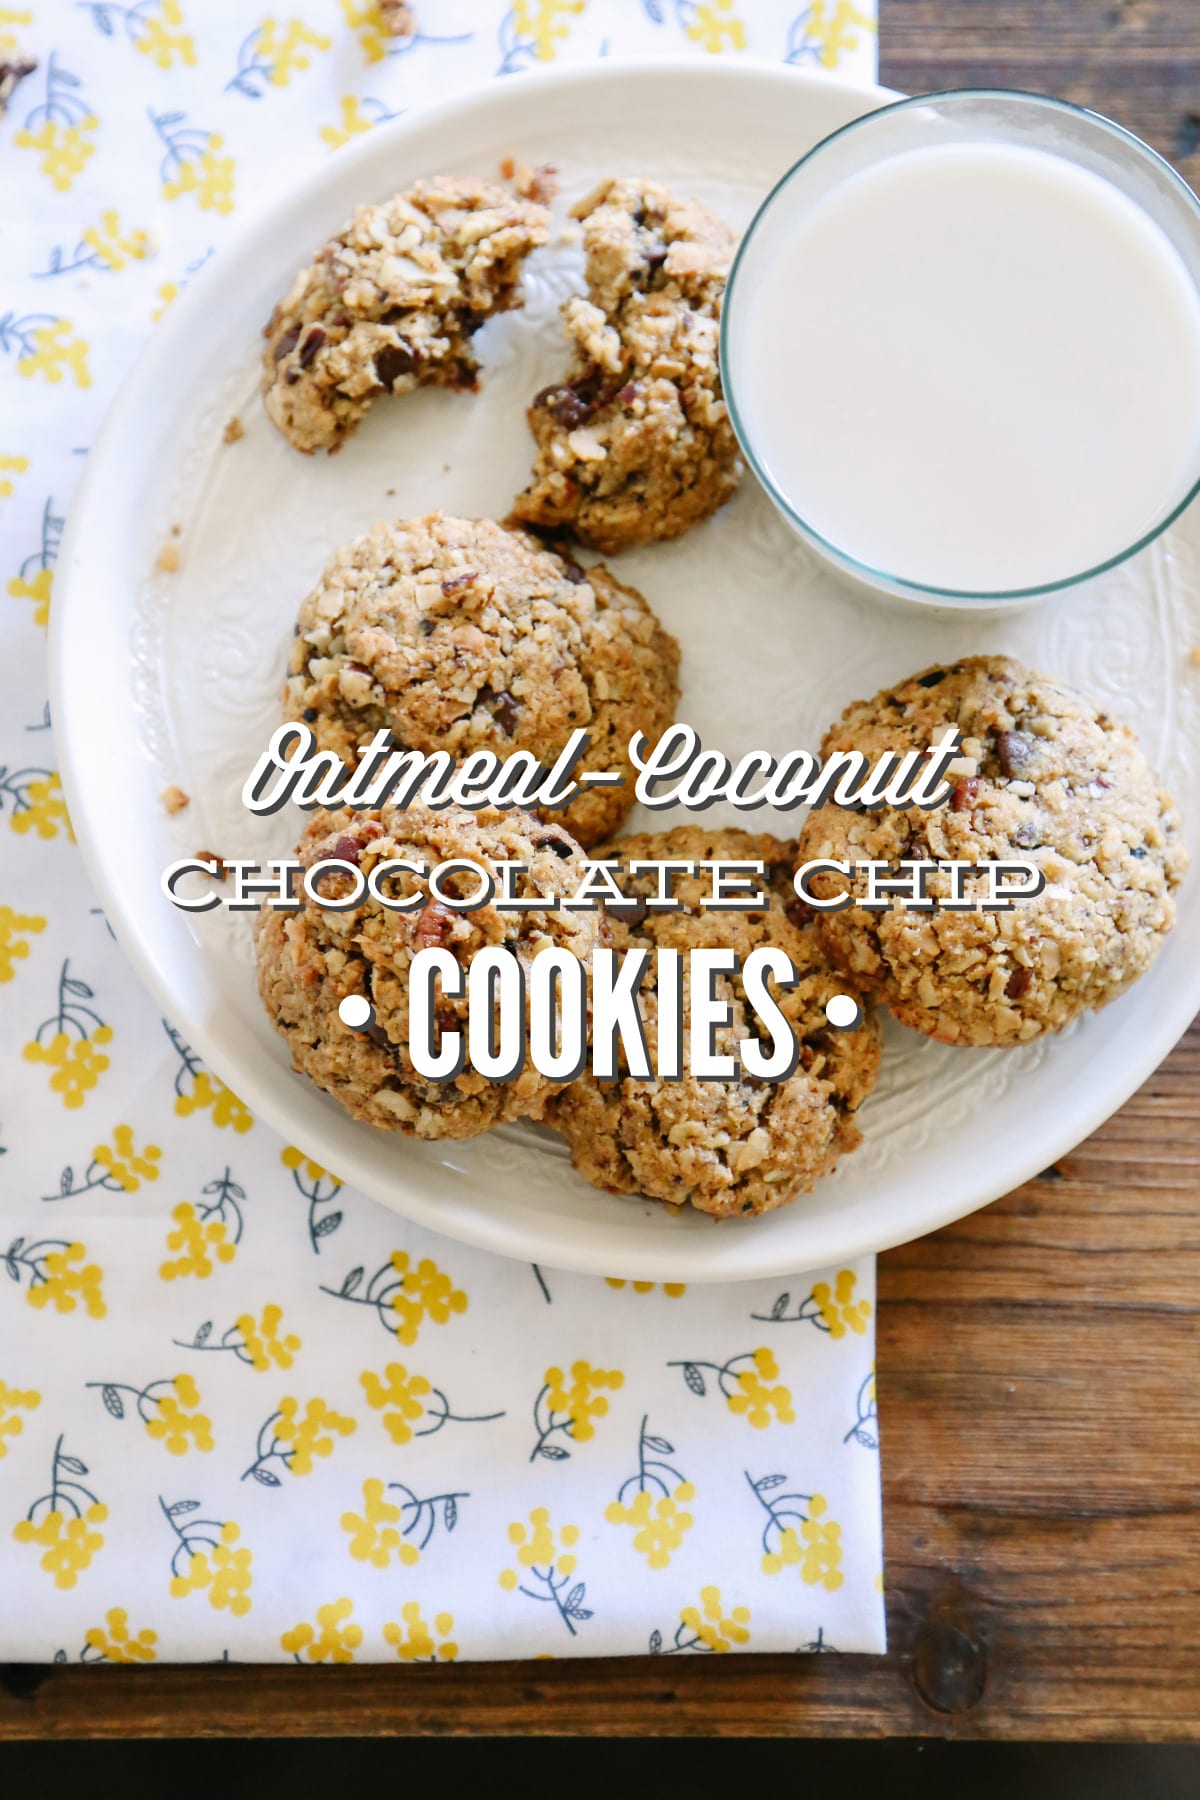 Oatmeal-Coconut Chocolate Chip Cookies